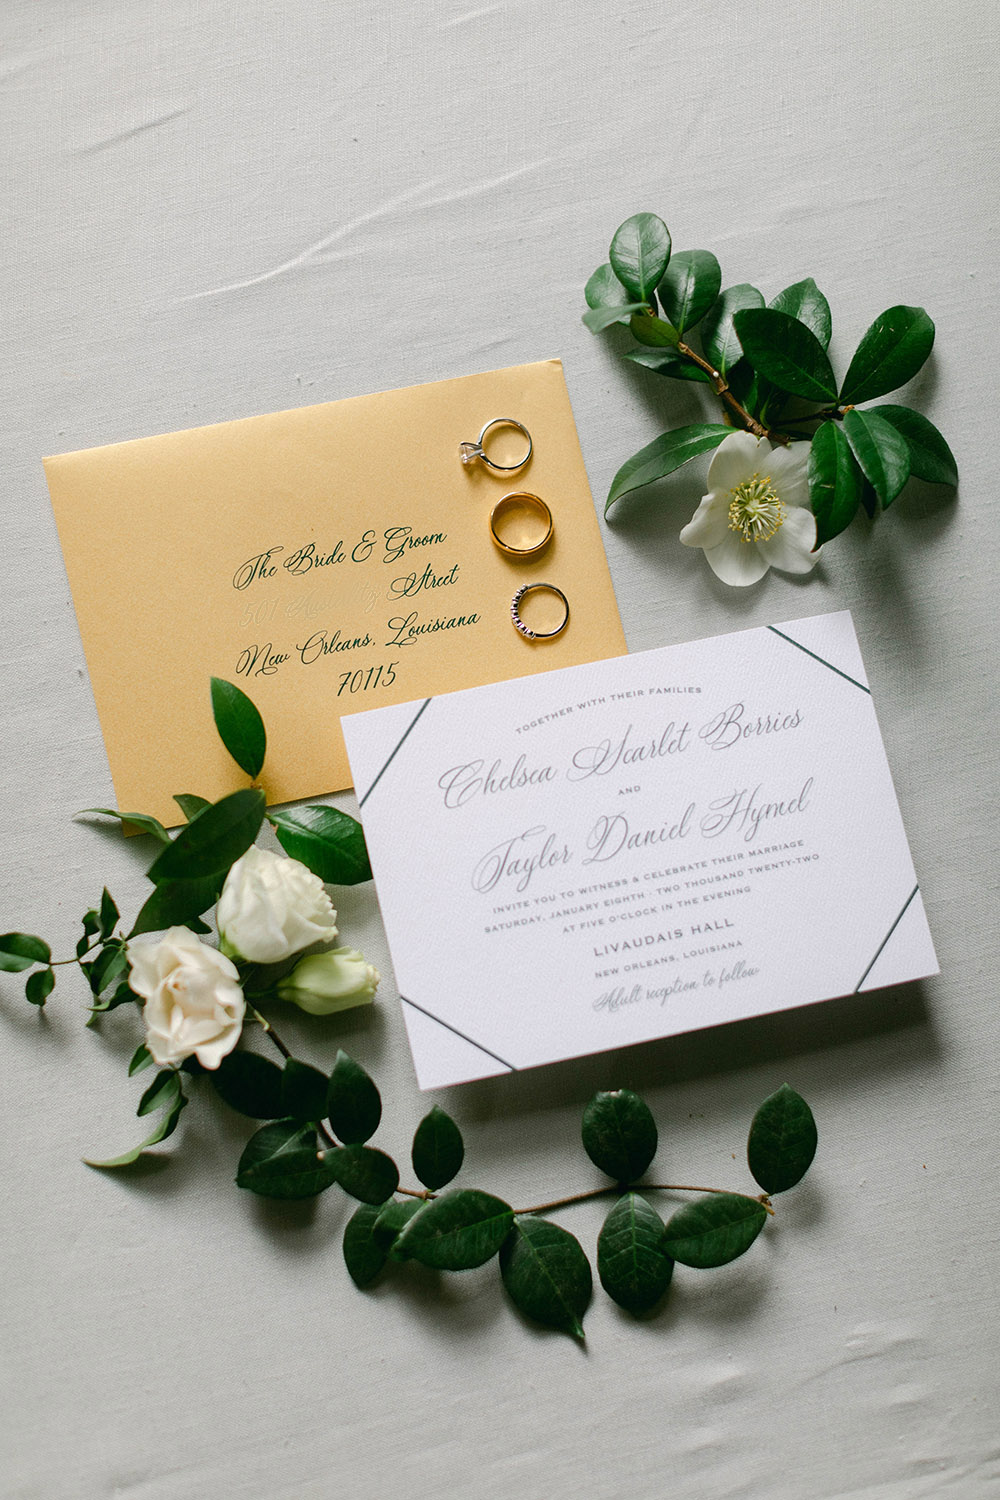 the wedding invitations with rings